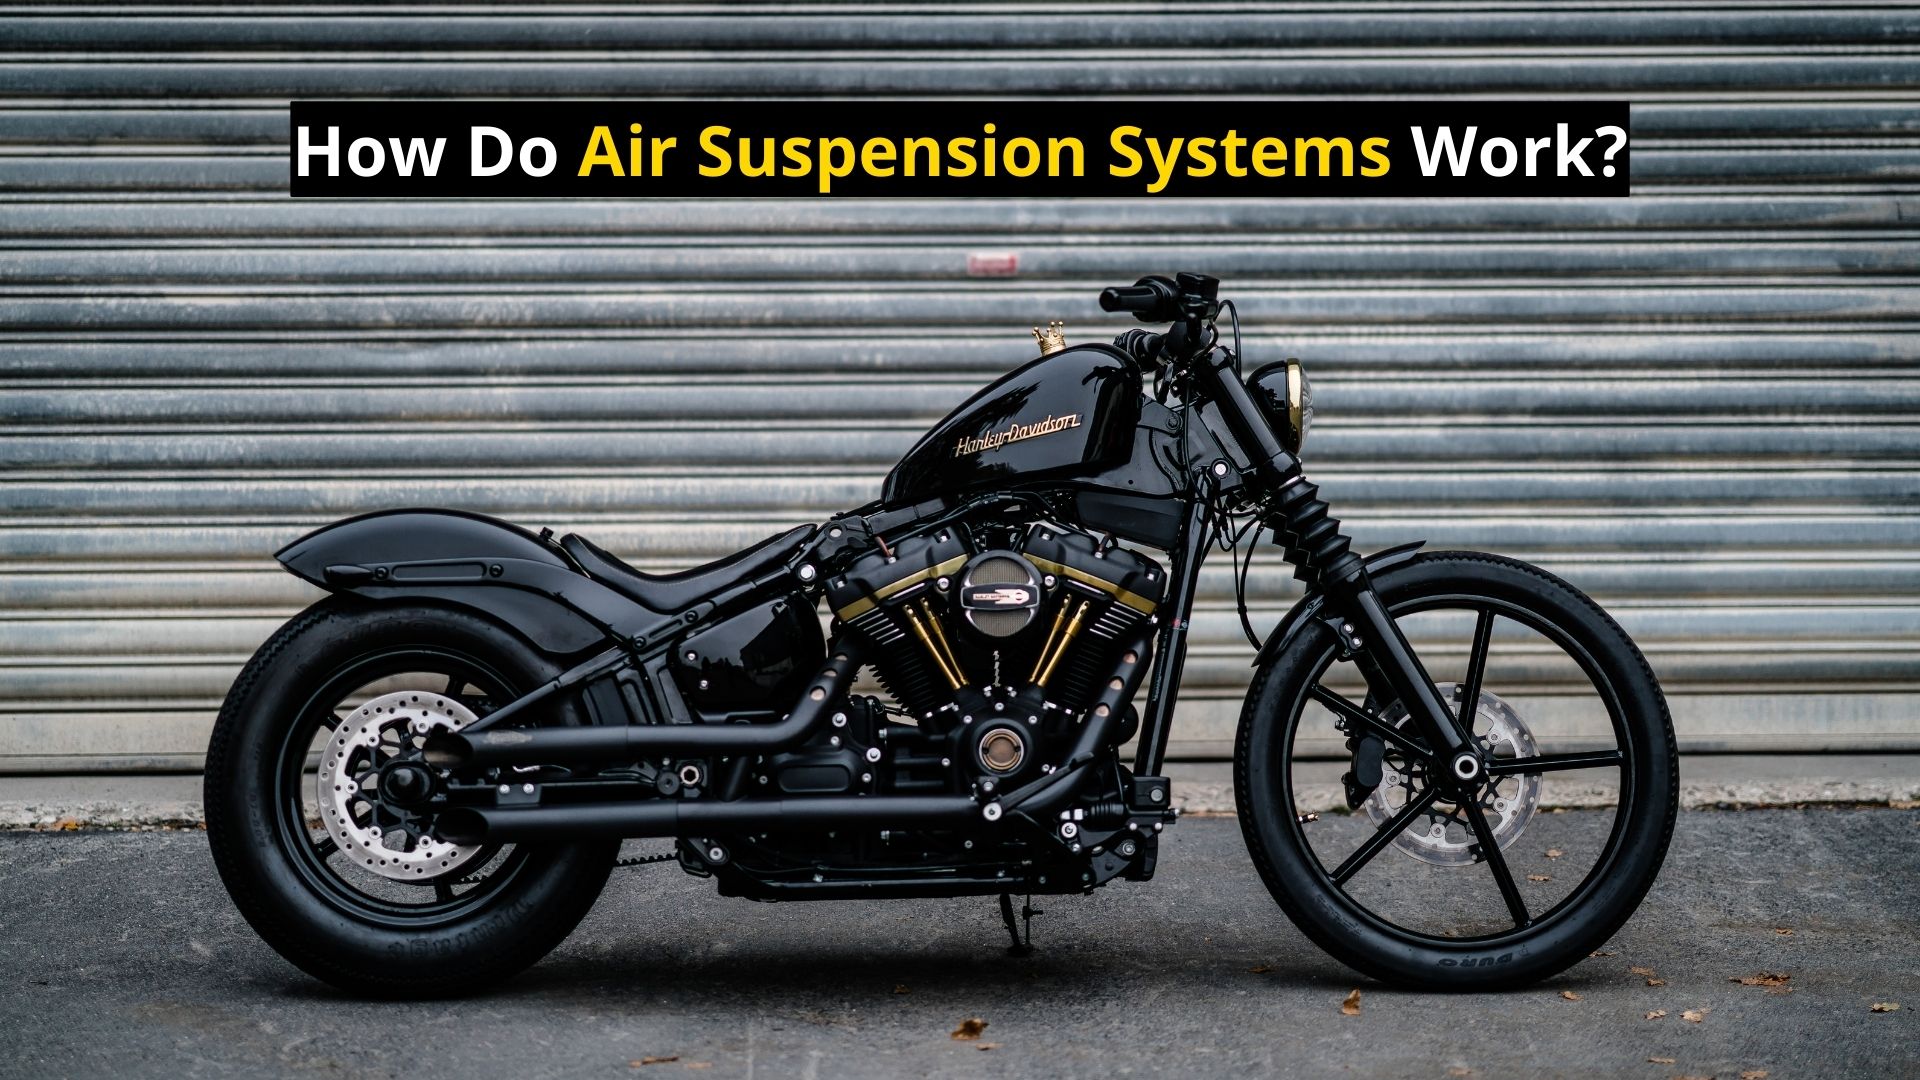 https://carandbike24.com/how-do-motorcycle-air-suspension-systems-work/